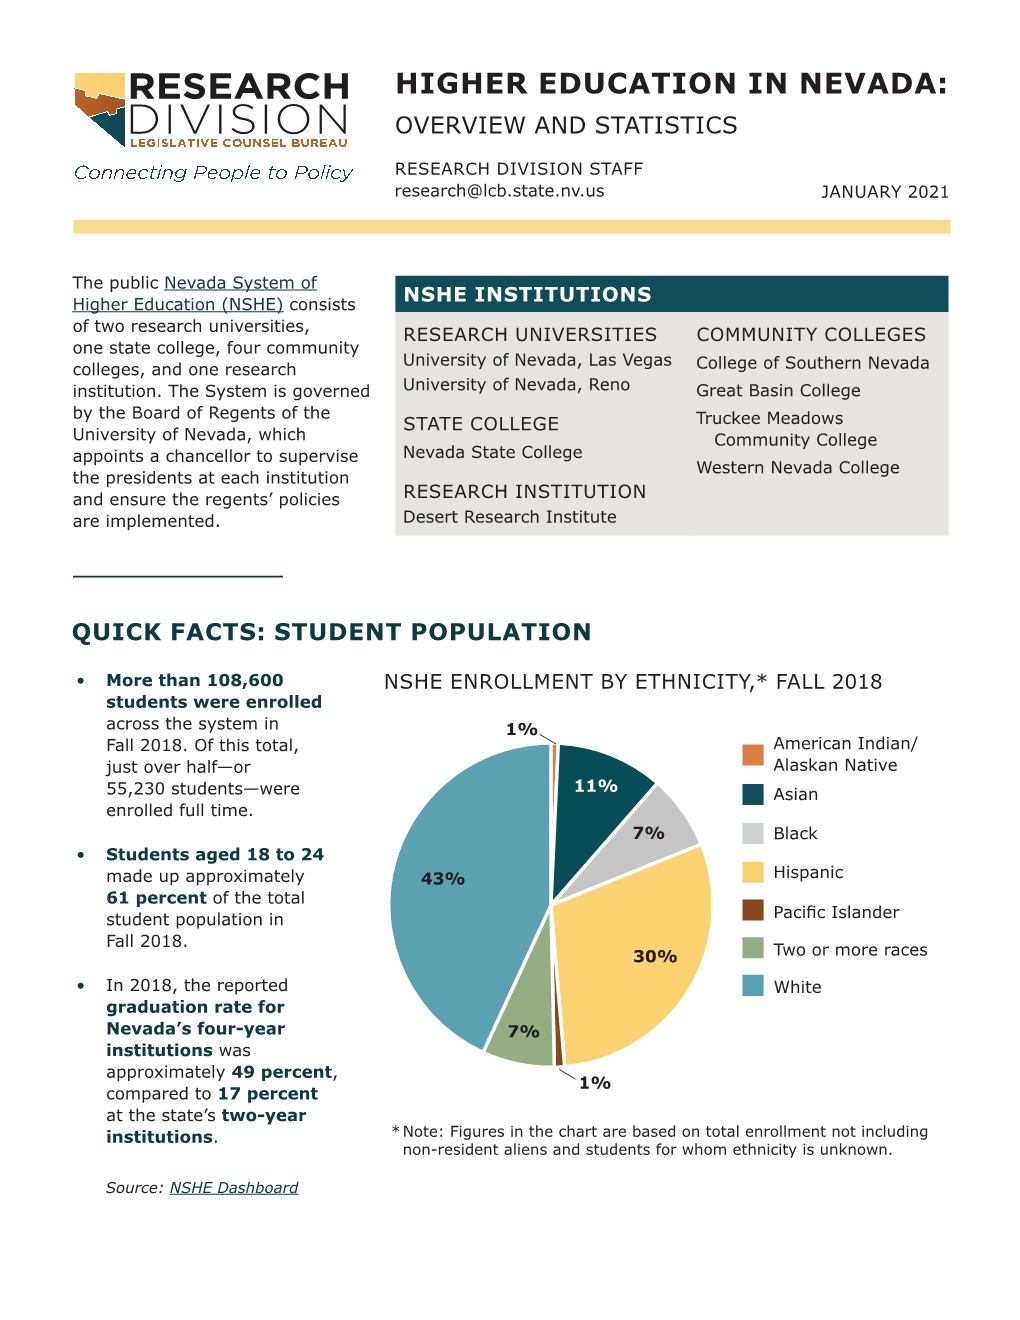 Higher Education in Nevada: Overview and Statistics